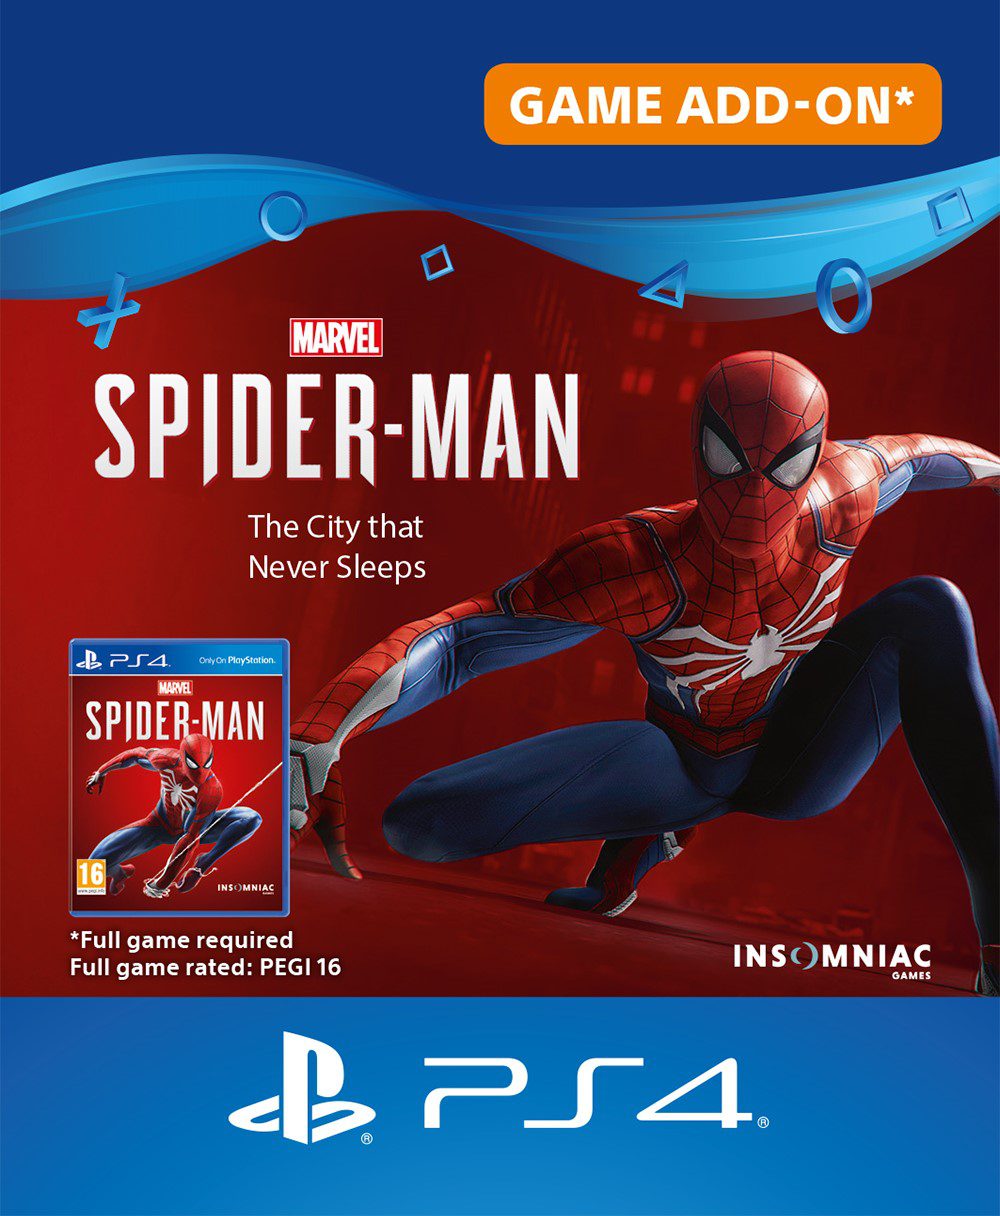 Marvel's SpiderMan Game of the Year-The City that Never Sleeps PS4 DLC  Digital Voucher Code. (Email Delivery within 1 Hr) - Zozila